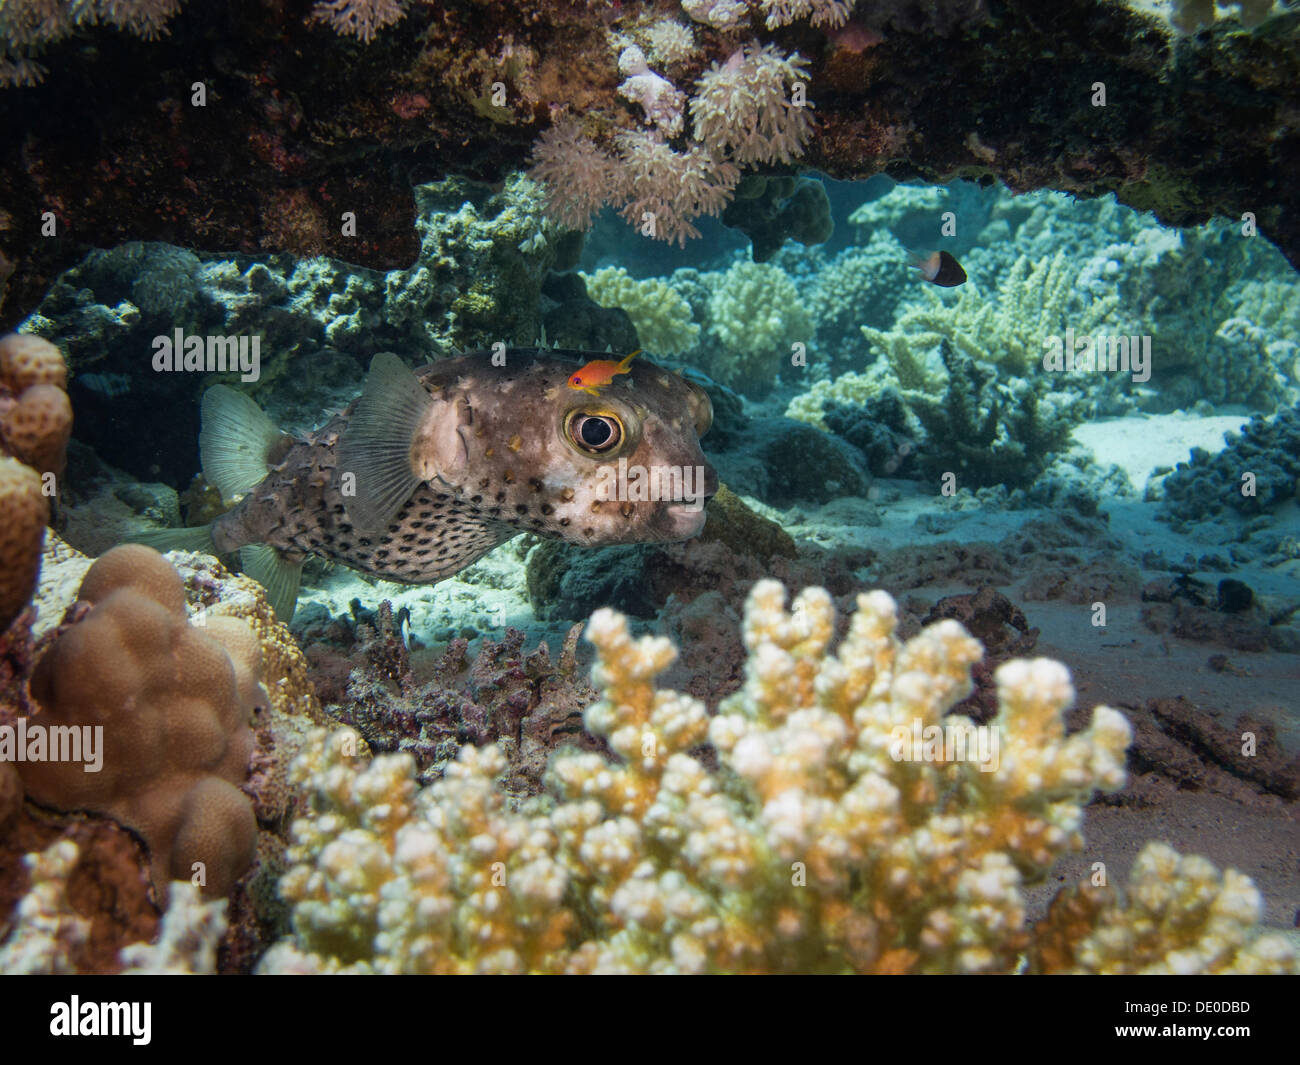 Yellow-spotted Porcupinefish or Yellow-spotted Burrfish (Cyclichthys spilostylus), Mangrove Bay, Red Sea, Egypt, Africa Stock Photo